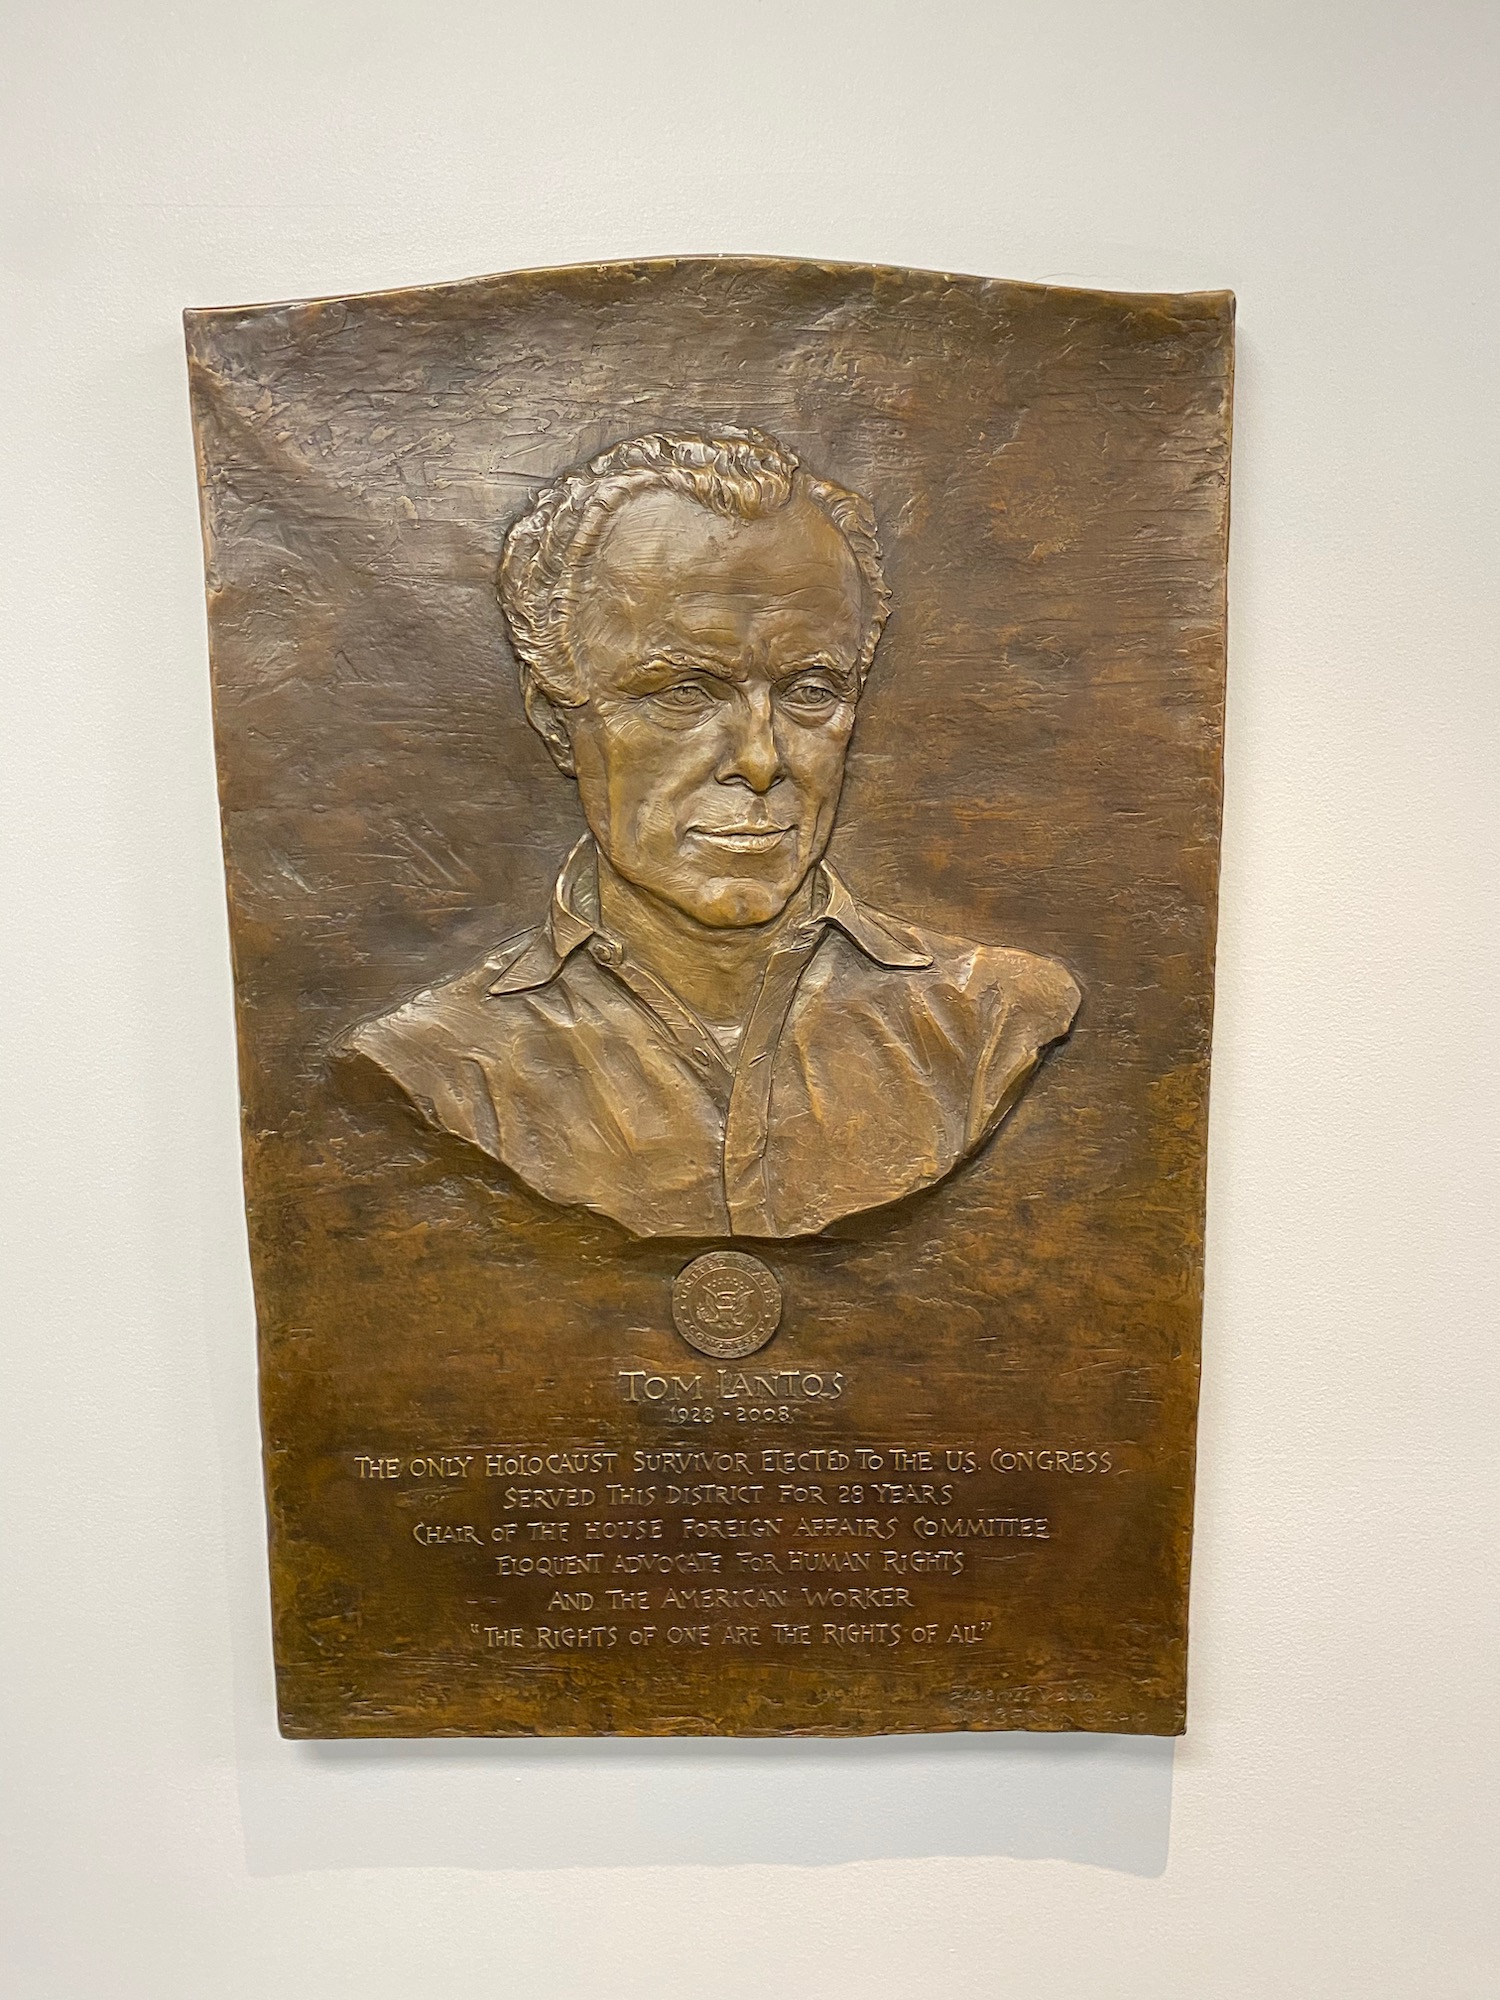 a plaque with a man's face